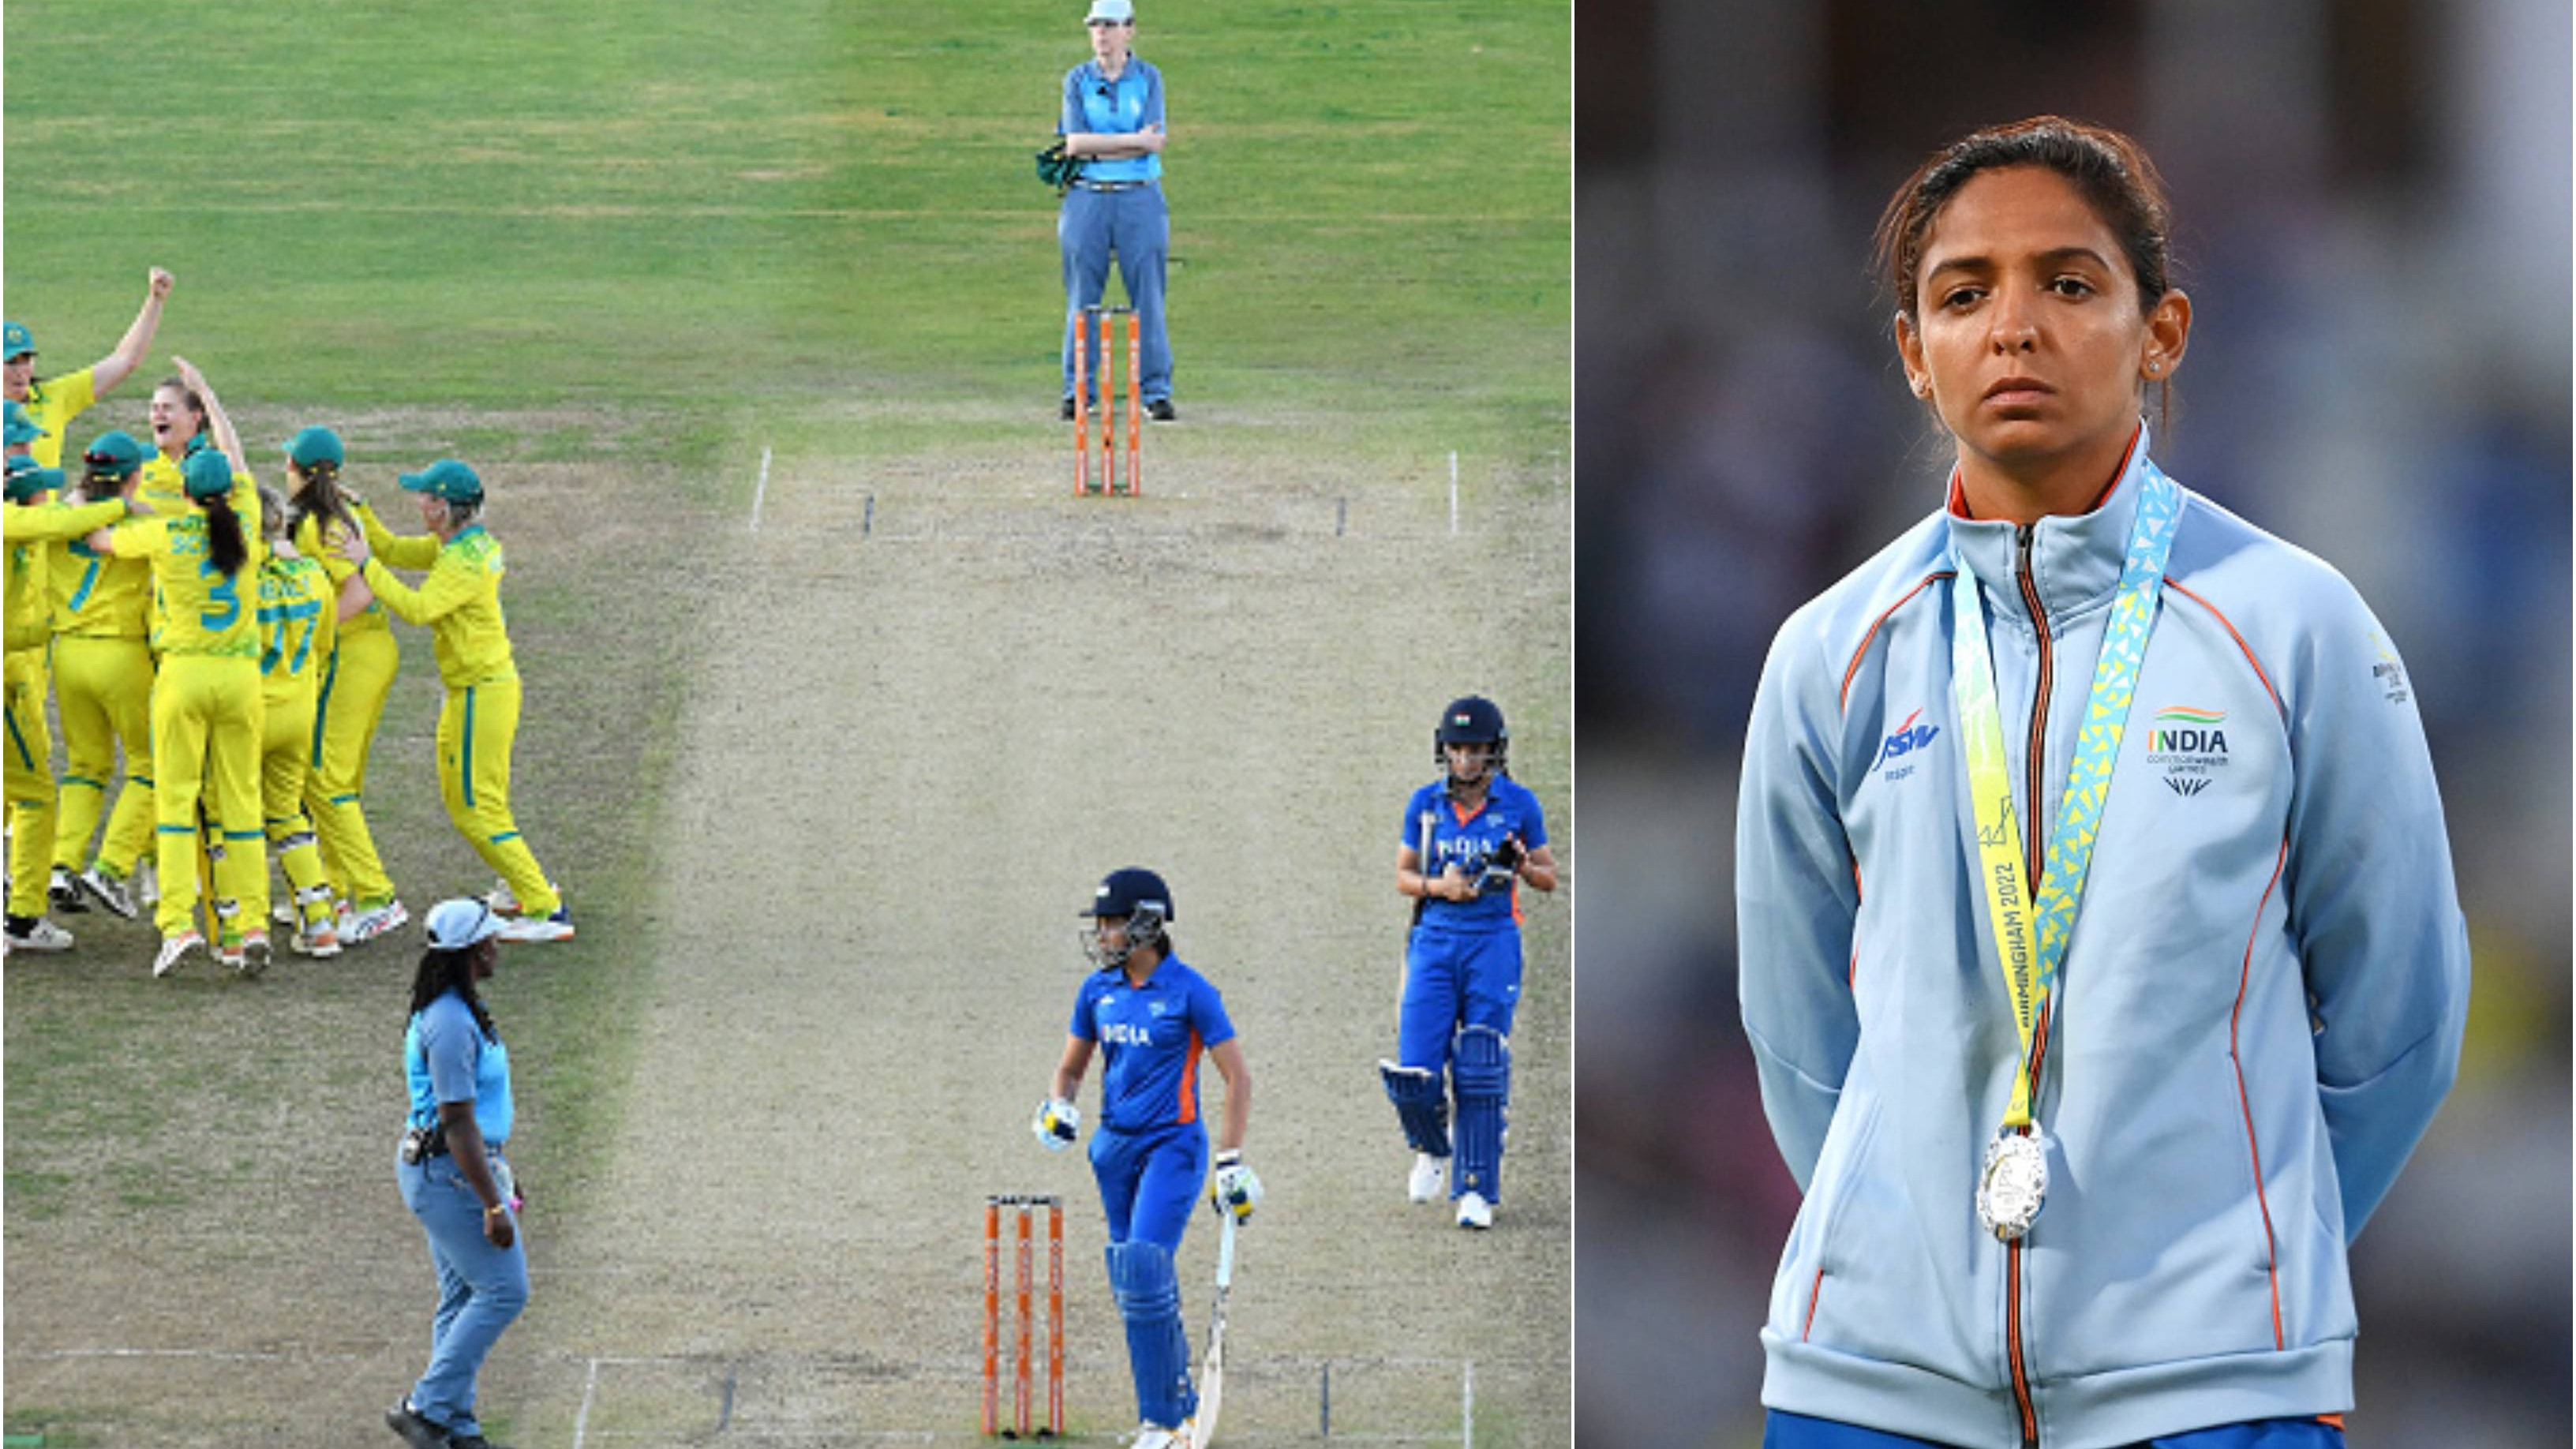 ‘Every time in big finals, we make the same mistakes’: Harmanpreet Kaur after CWG 2022 final loss to Australia